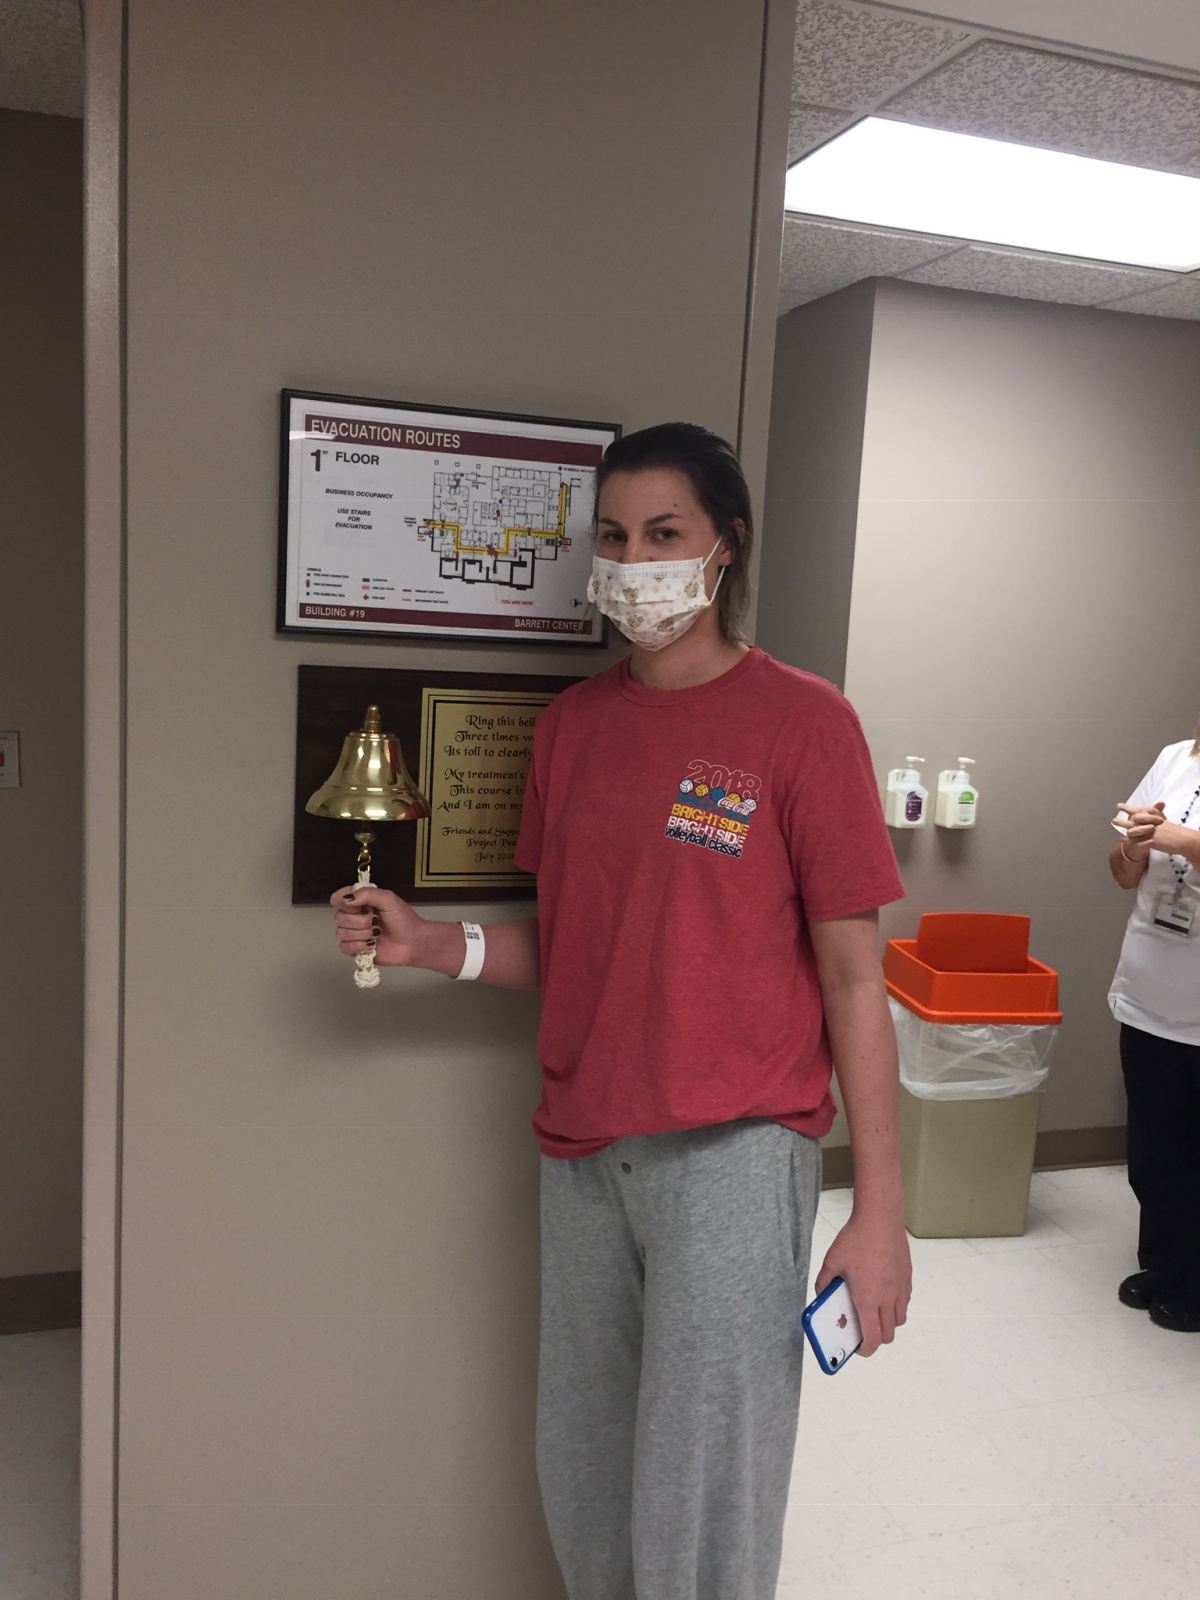 Finished radiation. Ringing the bell!